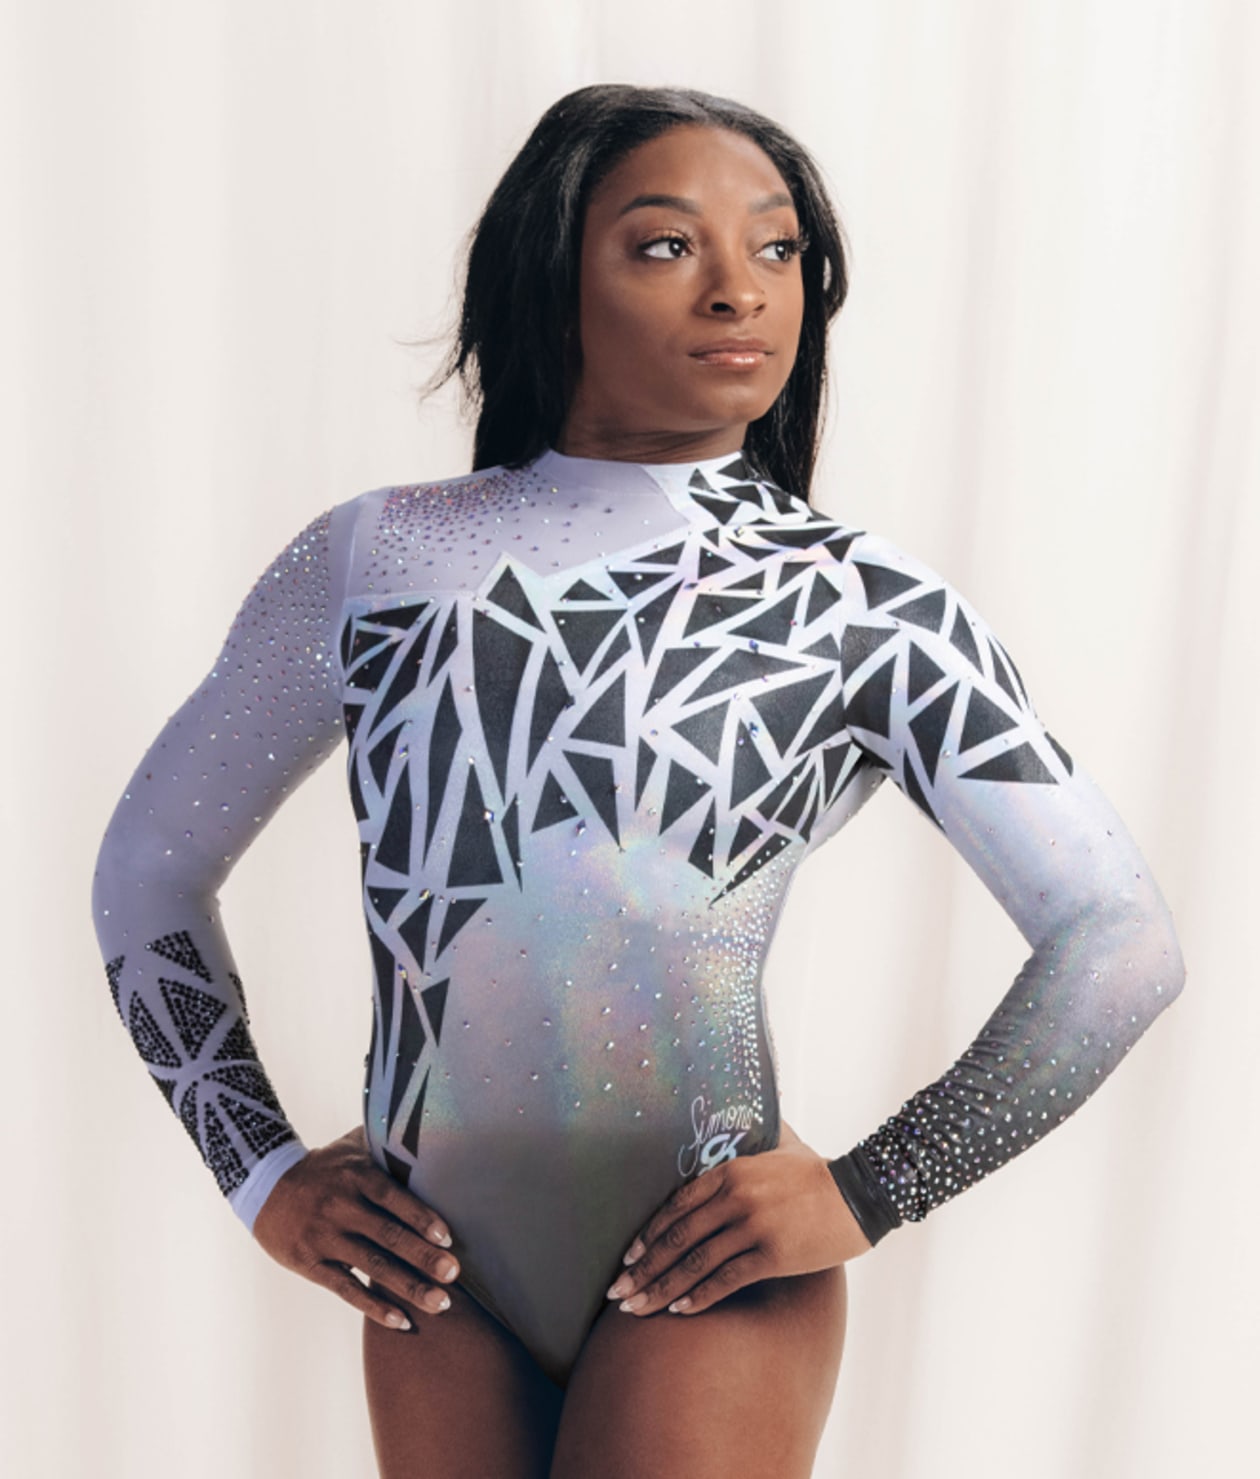 GK Elite and Simone Biles Extend Partnership with First-Ever